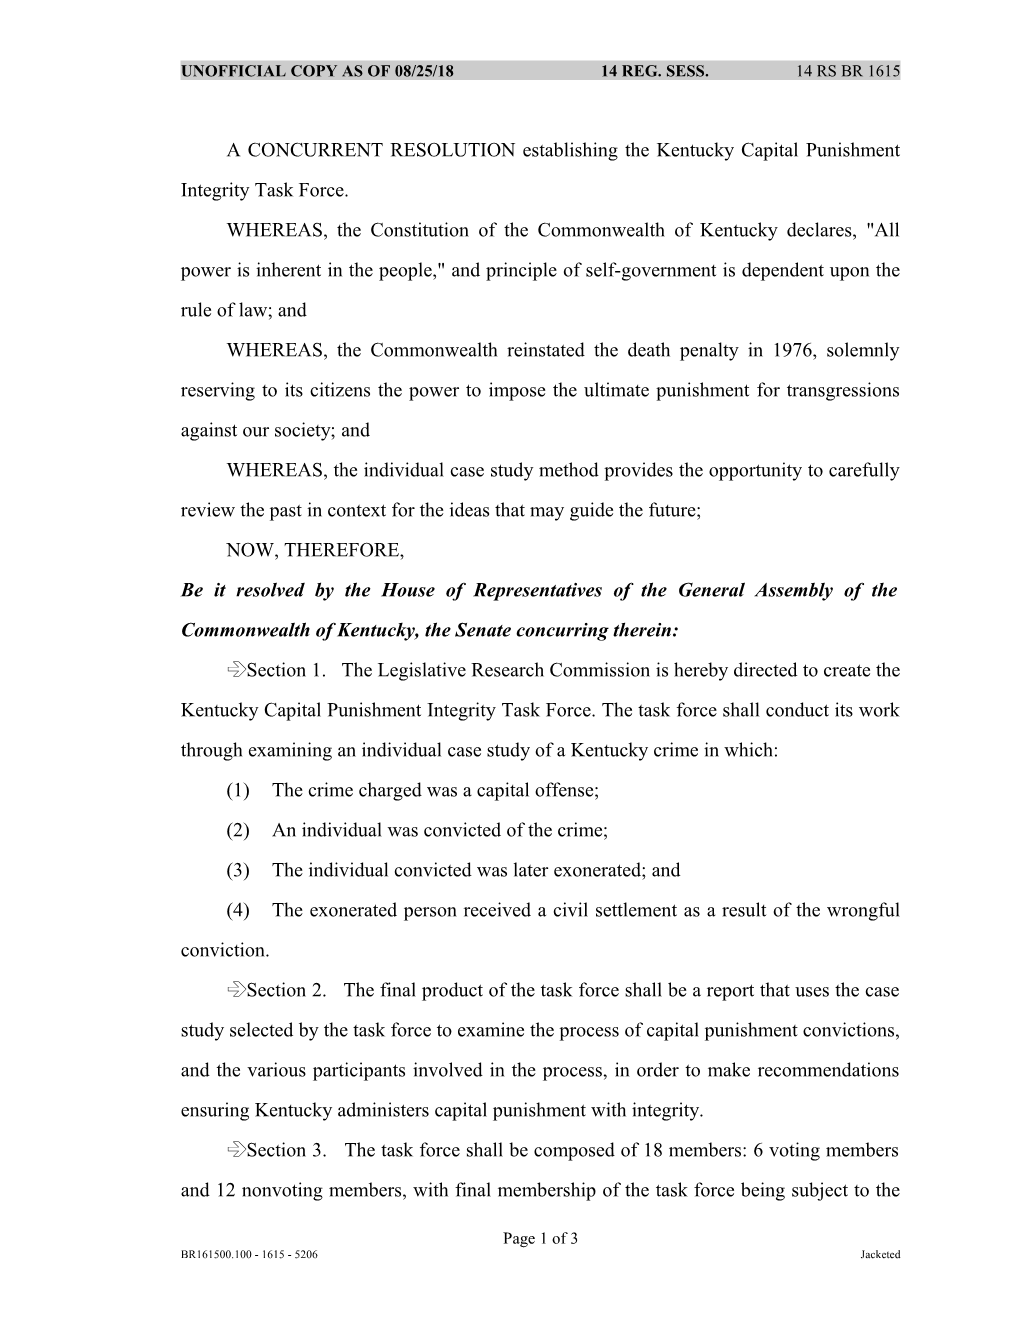 A CONCURRENT RESOLUTION Establishing the Kentucky Capital Punishment Integrity Task Force